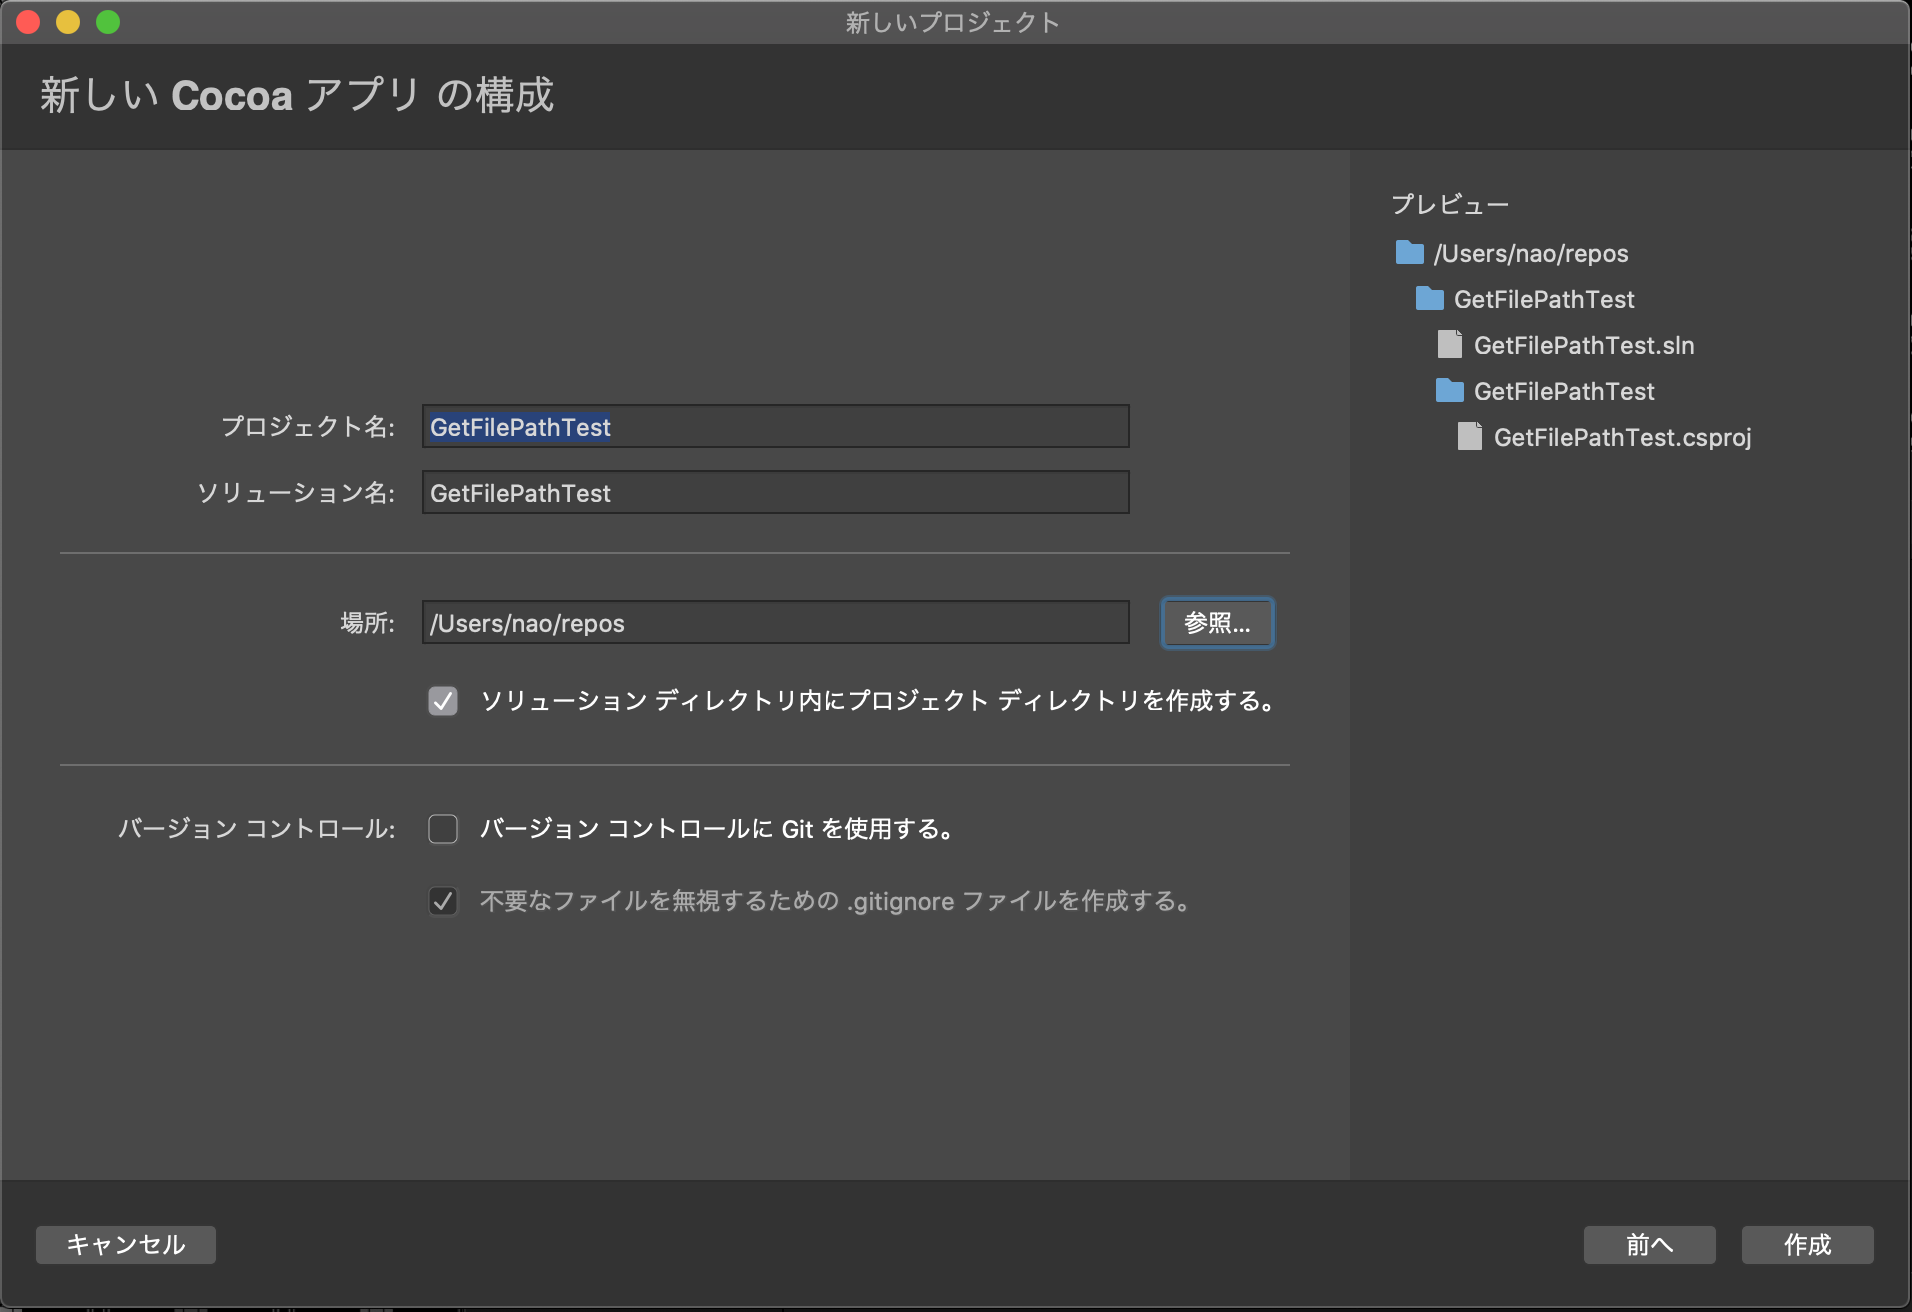 VS2019forMac-Cocoaアプリの構成画面